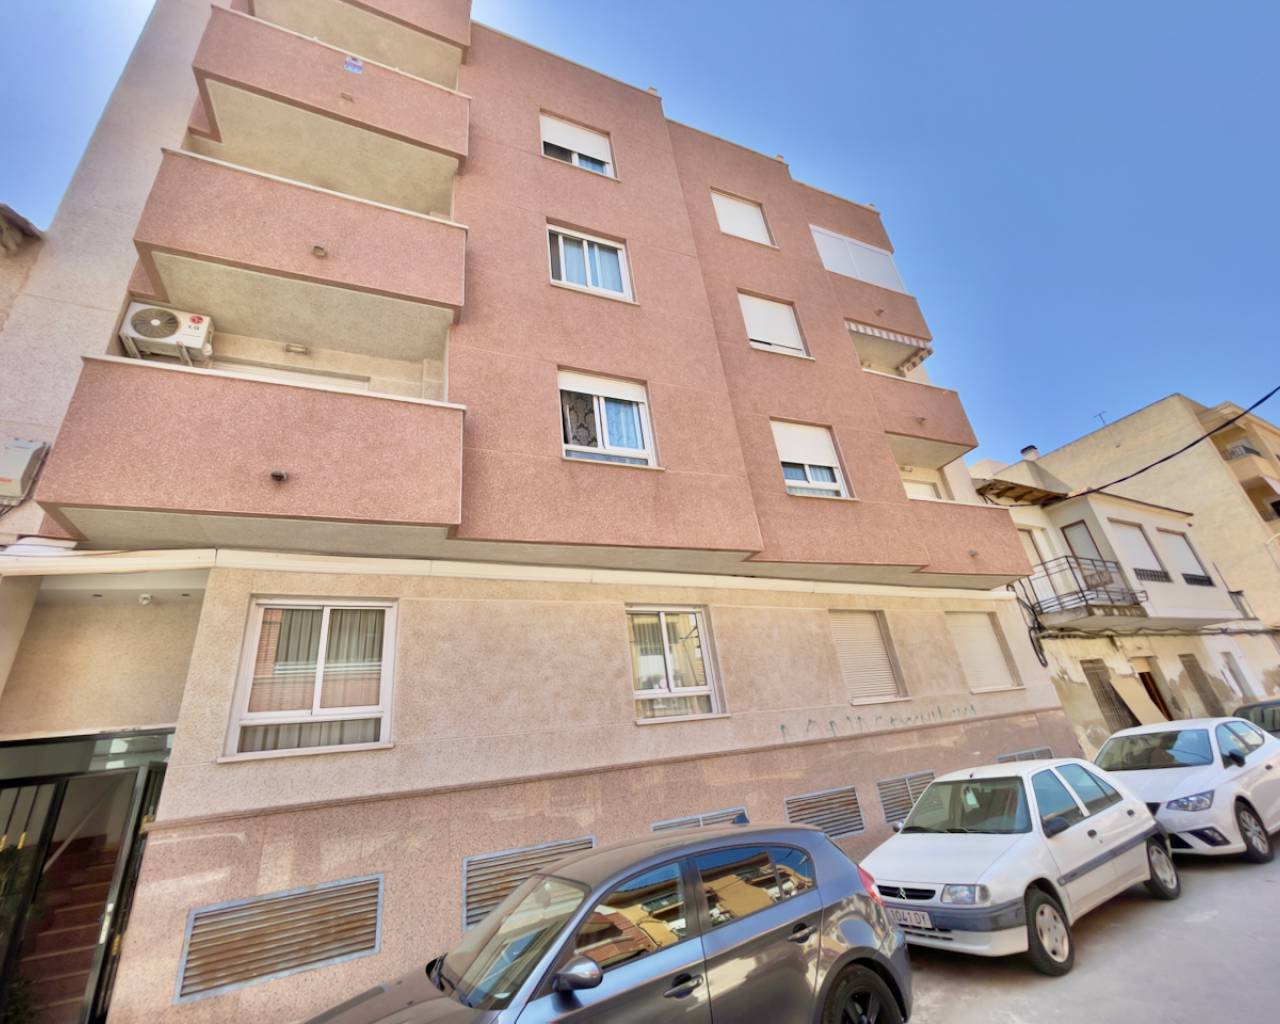 For sale: 2 bedroom apartment / flat in Almoradí